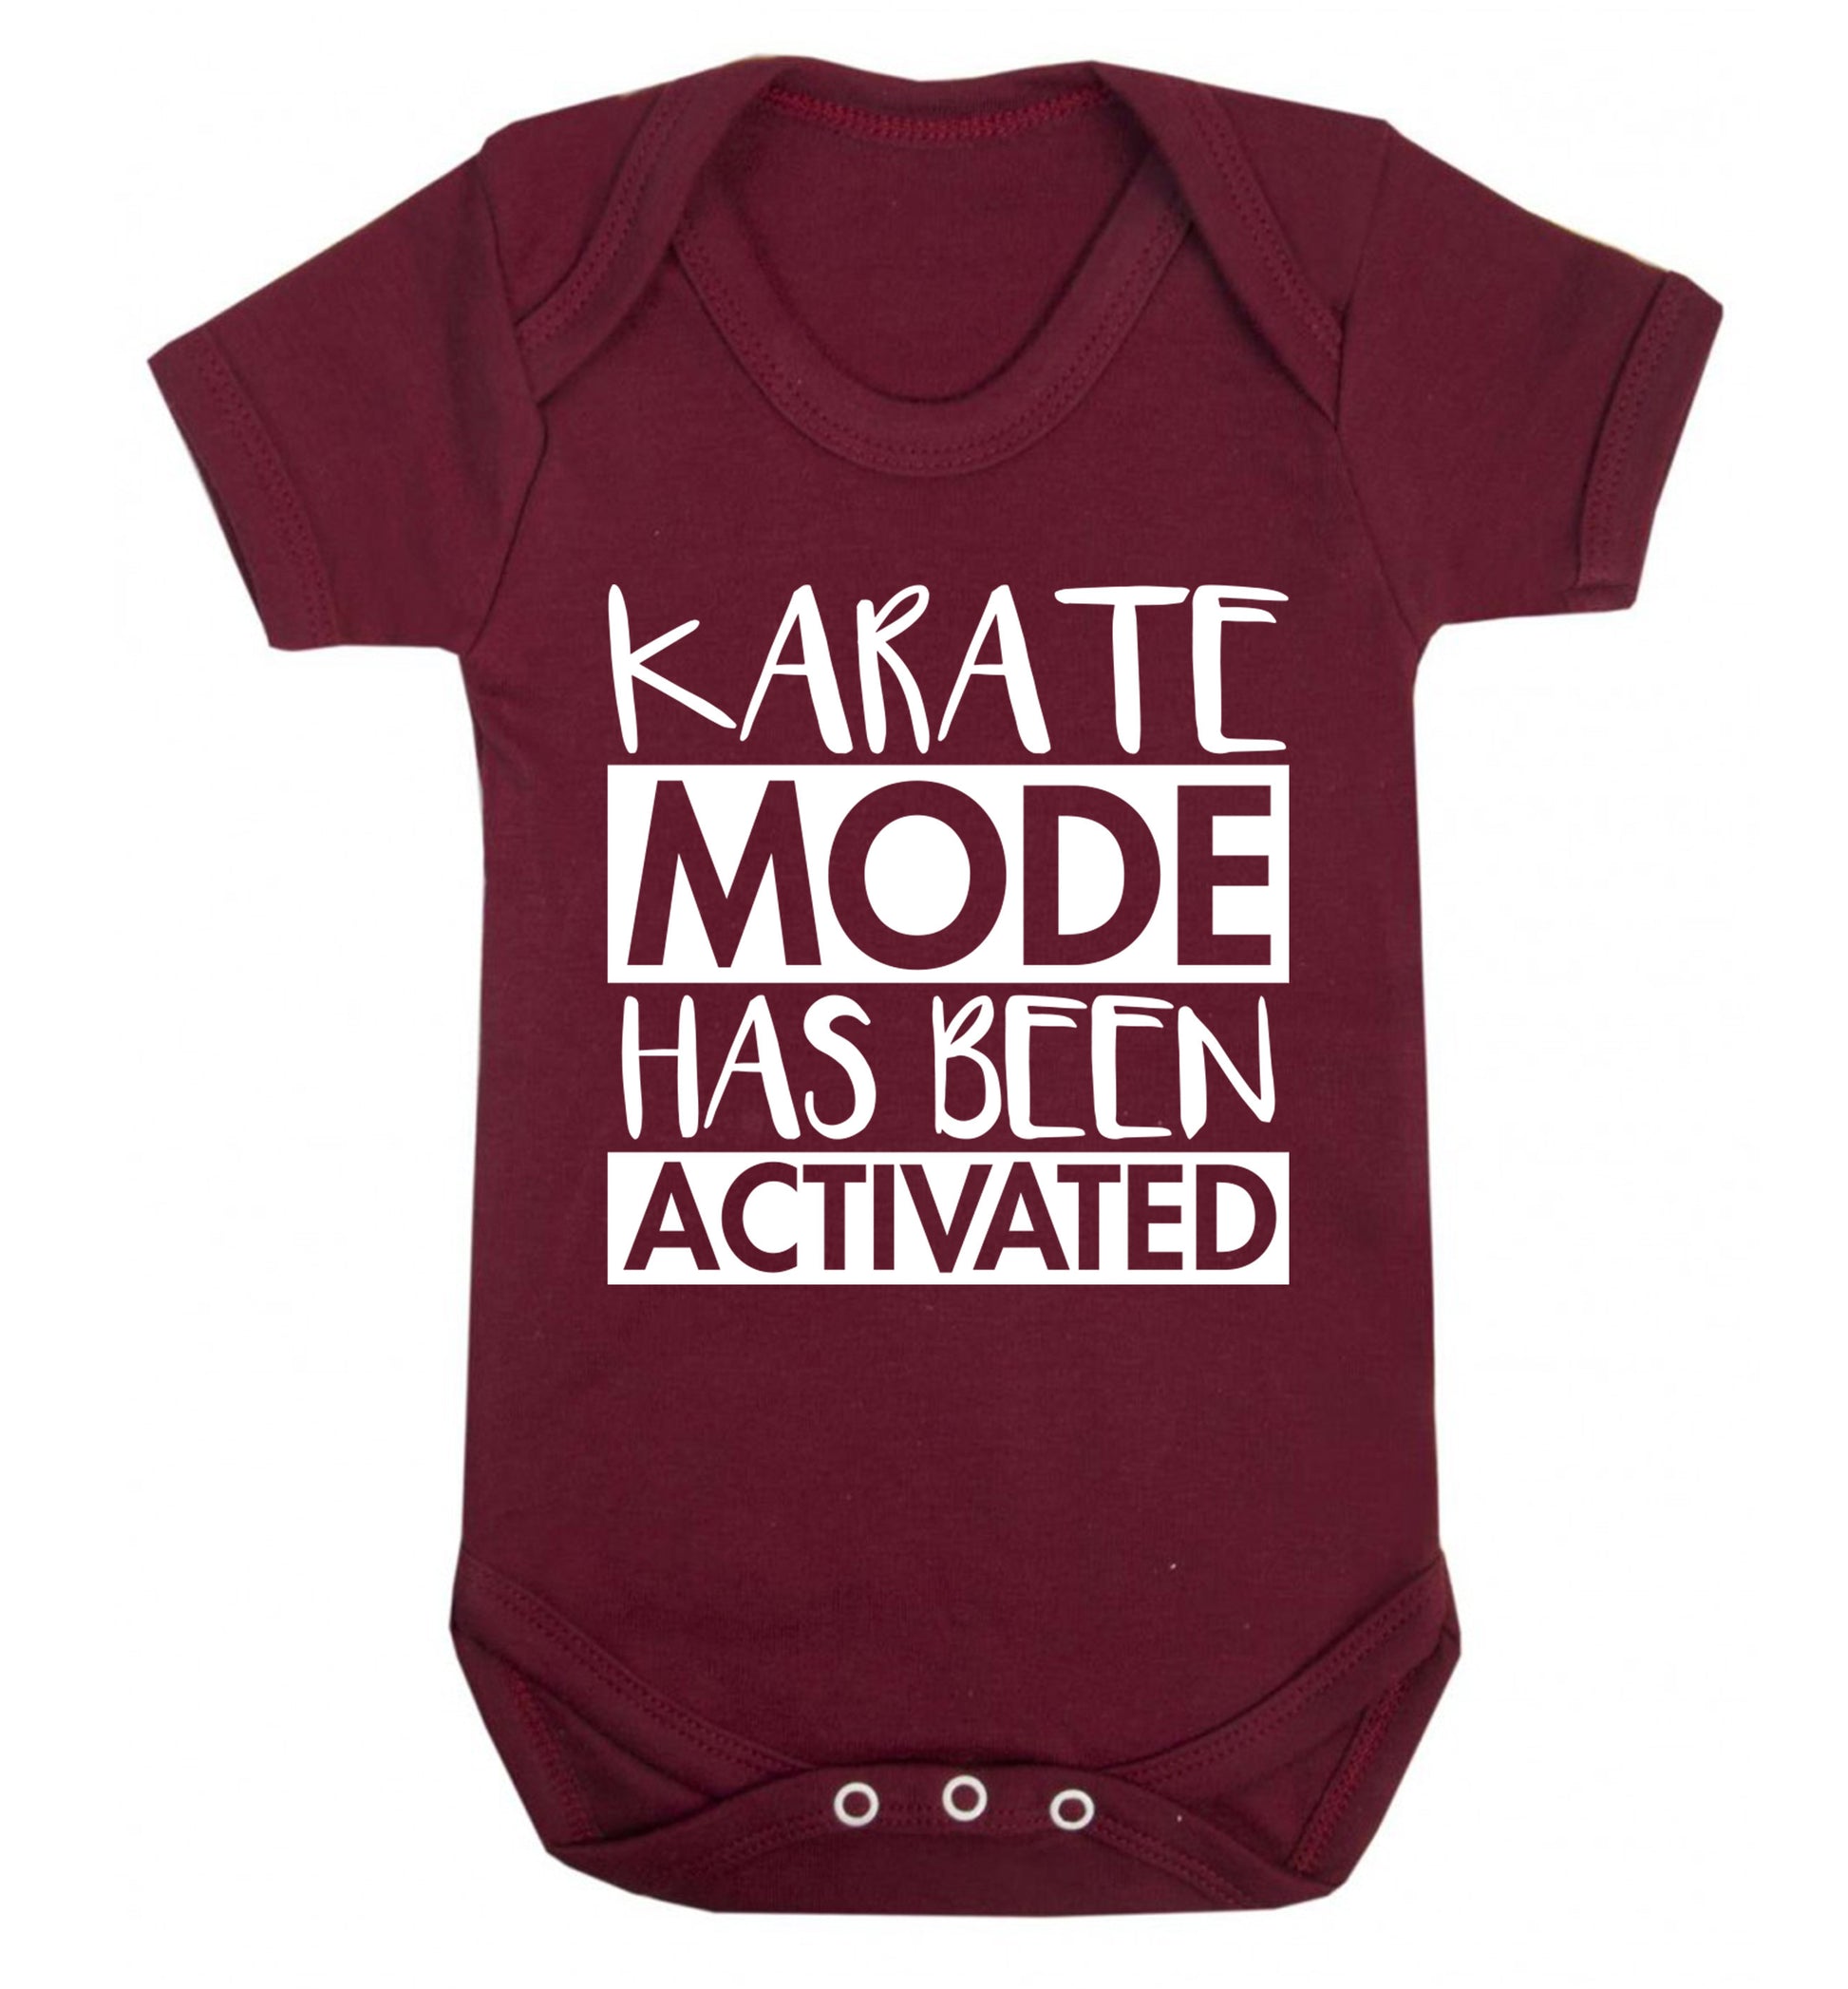 Karate mode activated Baby Vest maroon 18-24 months